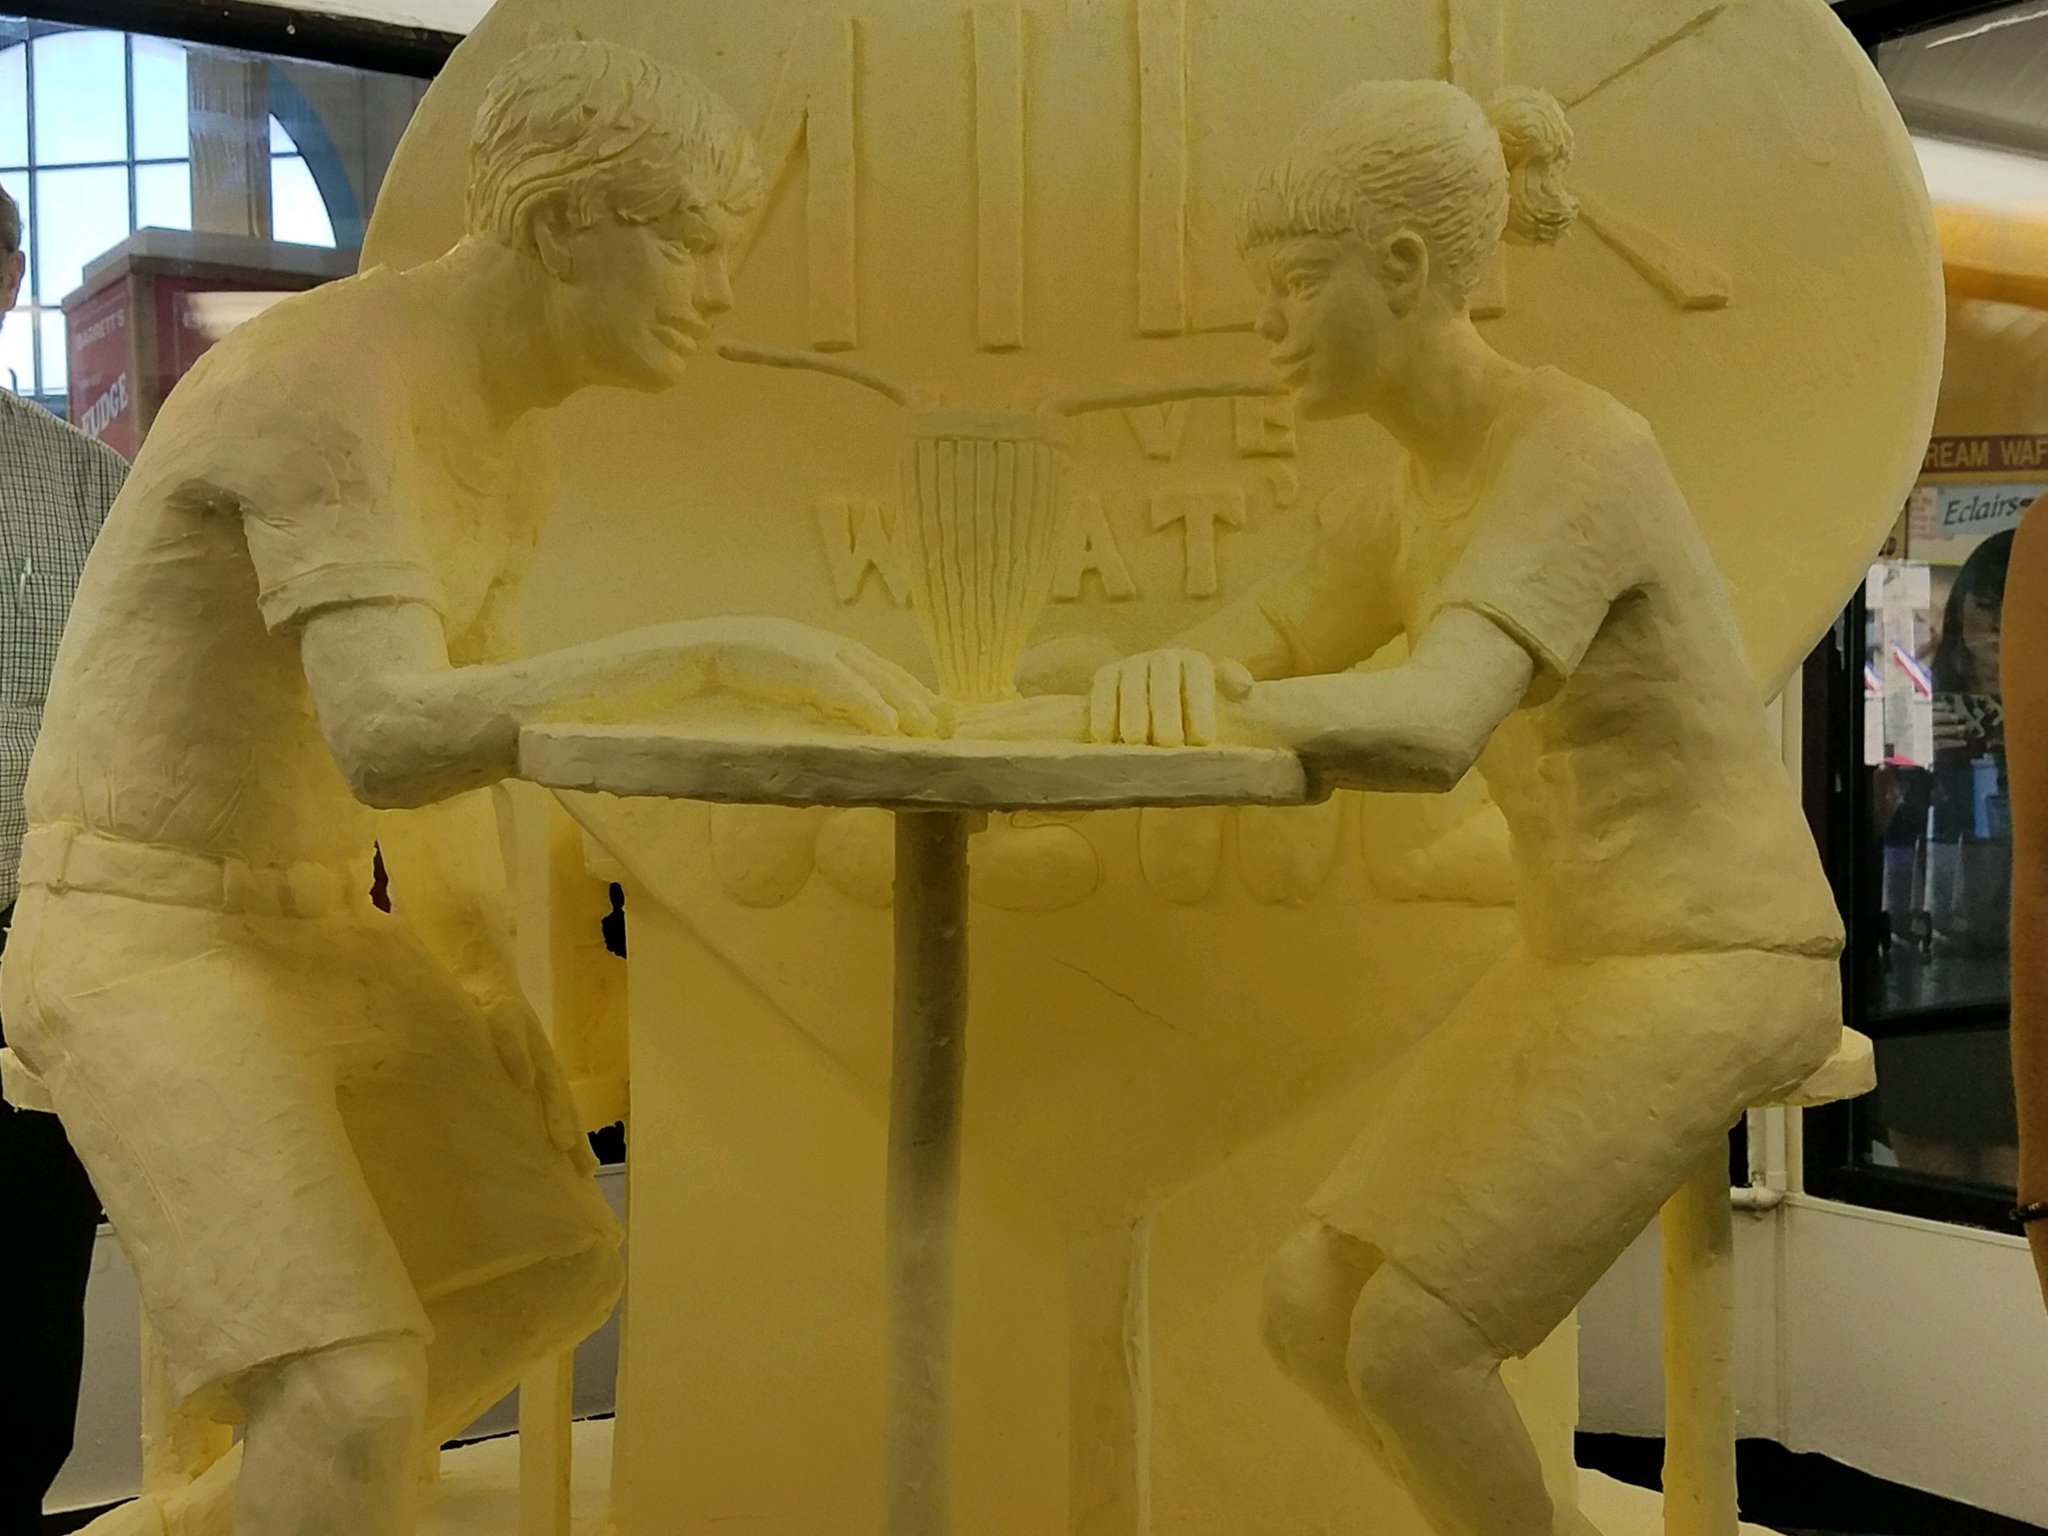 51st Annual NY State Fair Butter Sculpture Unveiled